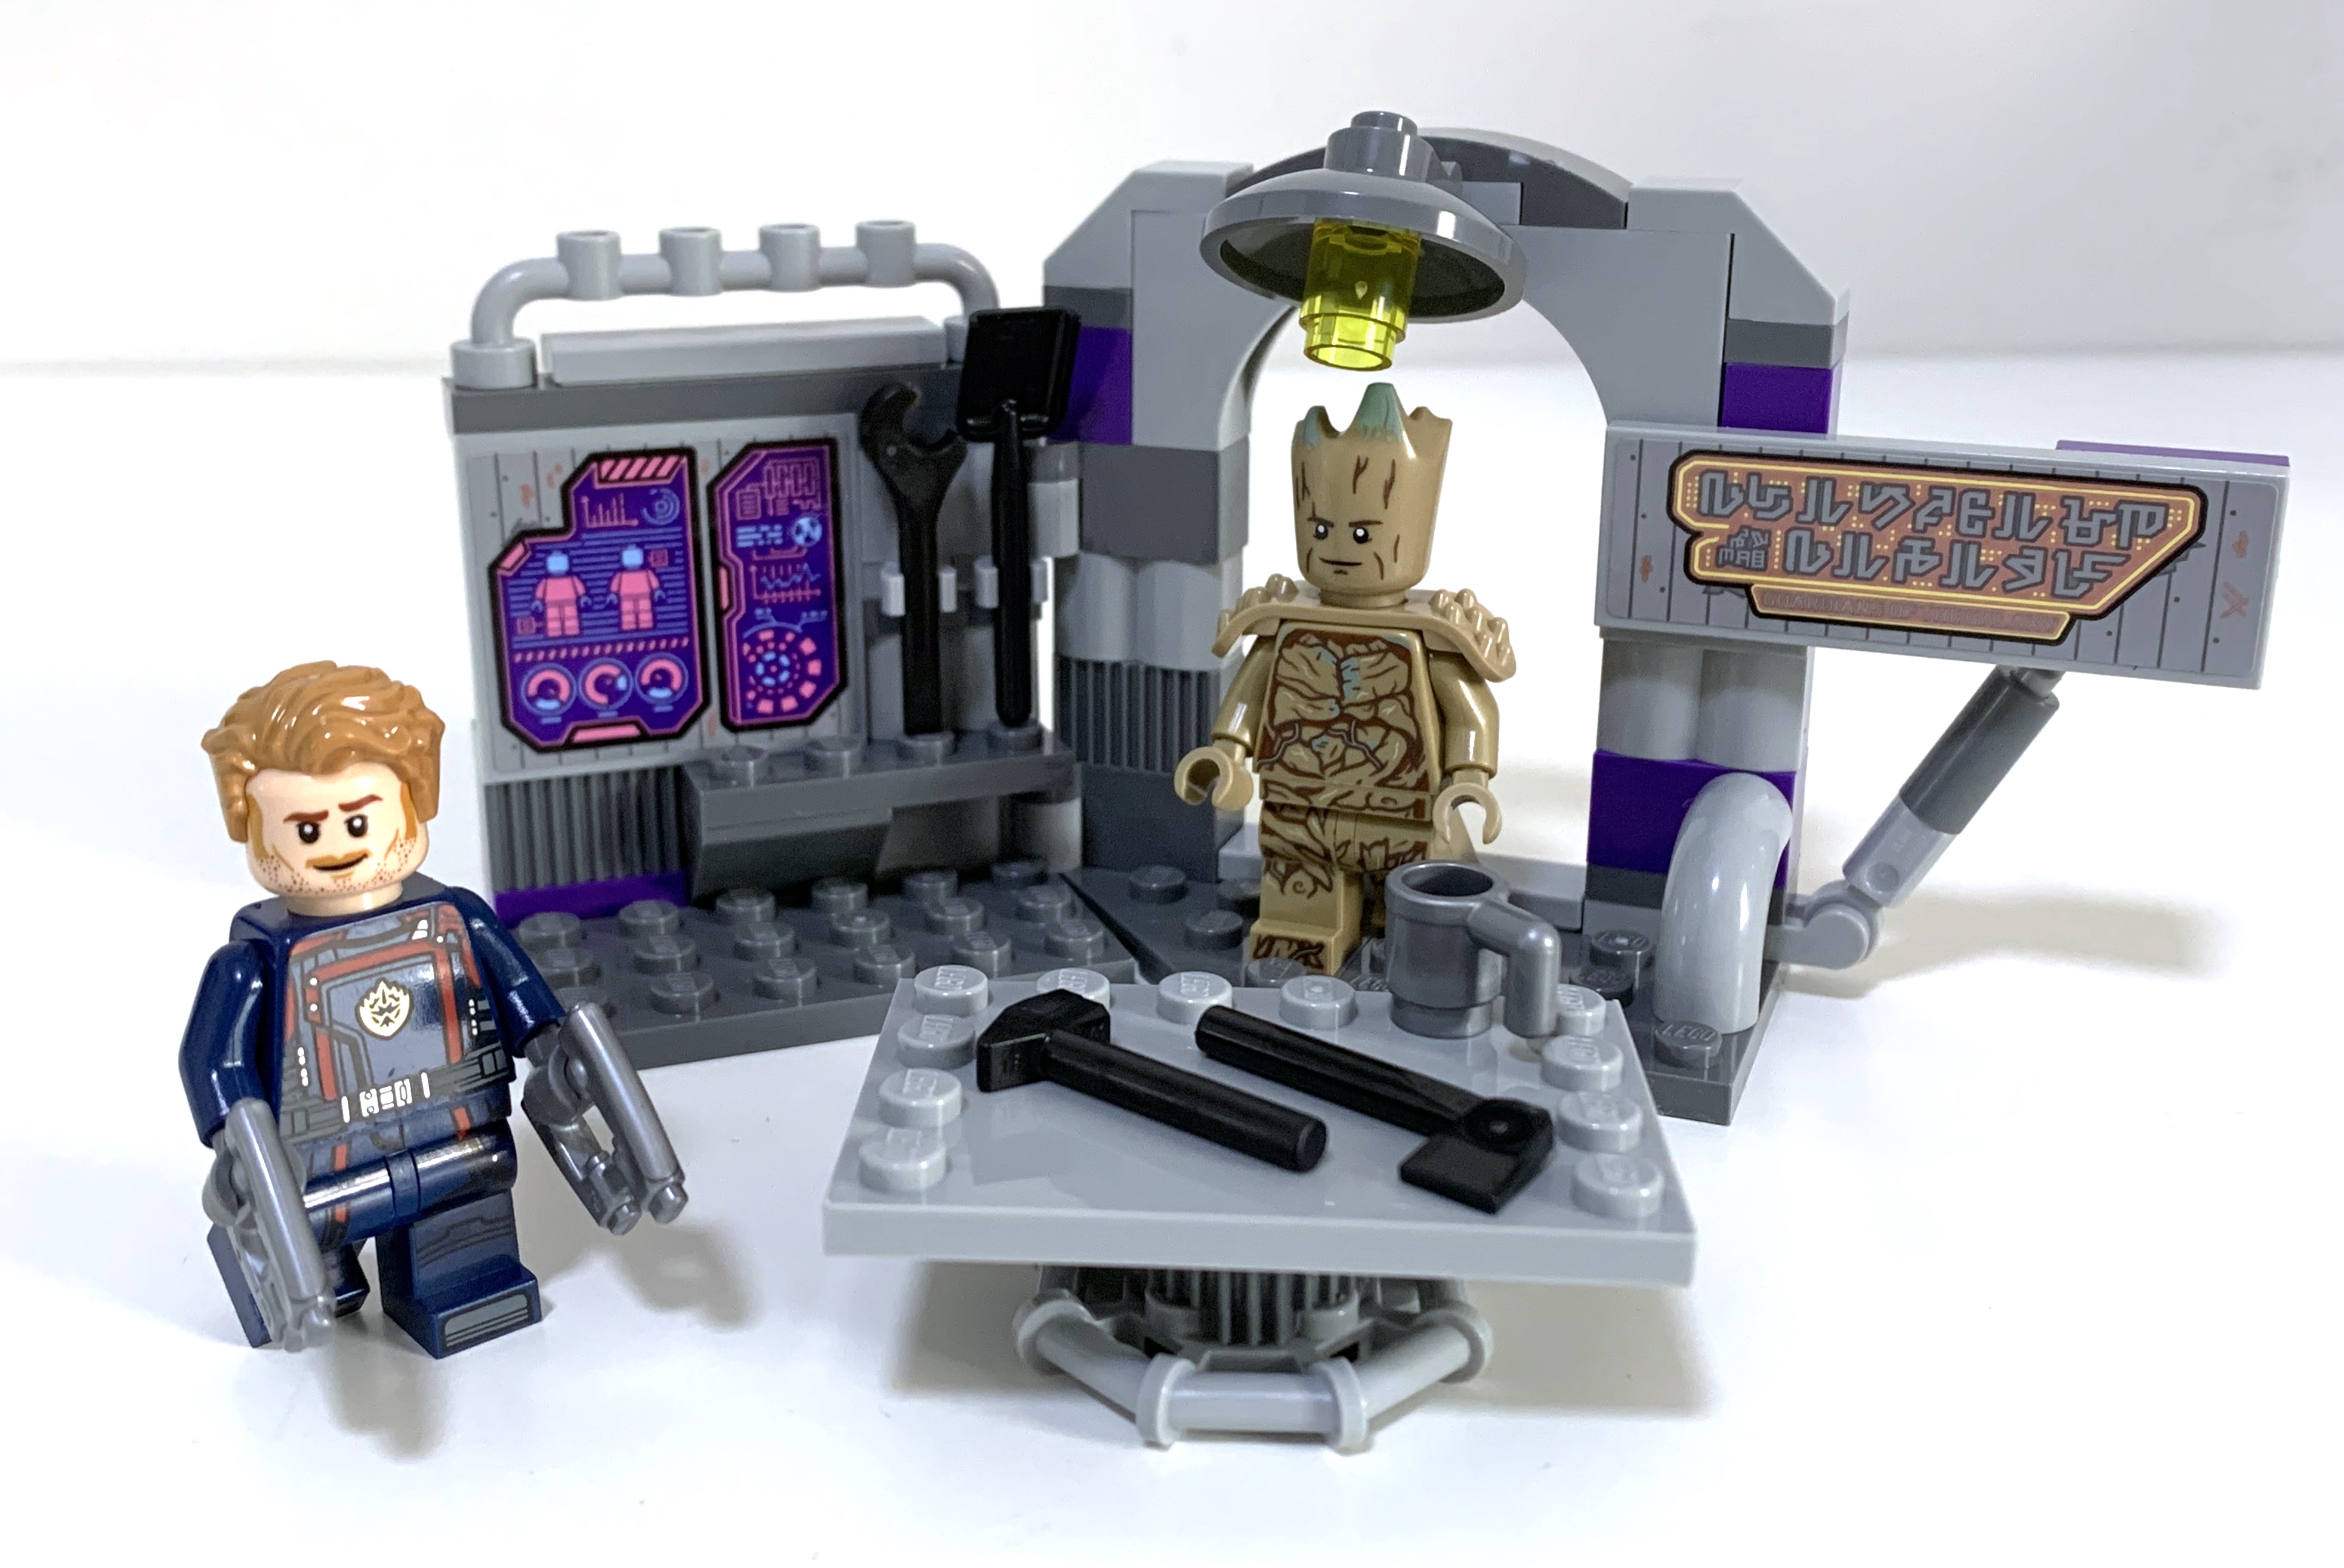 Review: LEGO 76253 Guardians of the Galaxy Headquarters - Jay\'s Brick Blog